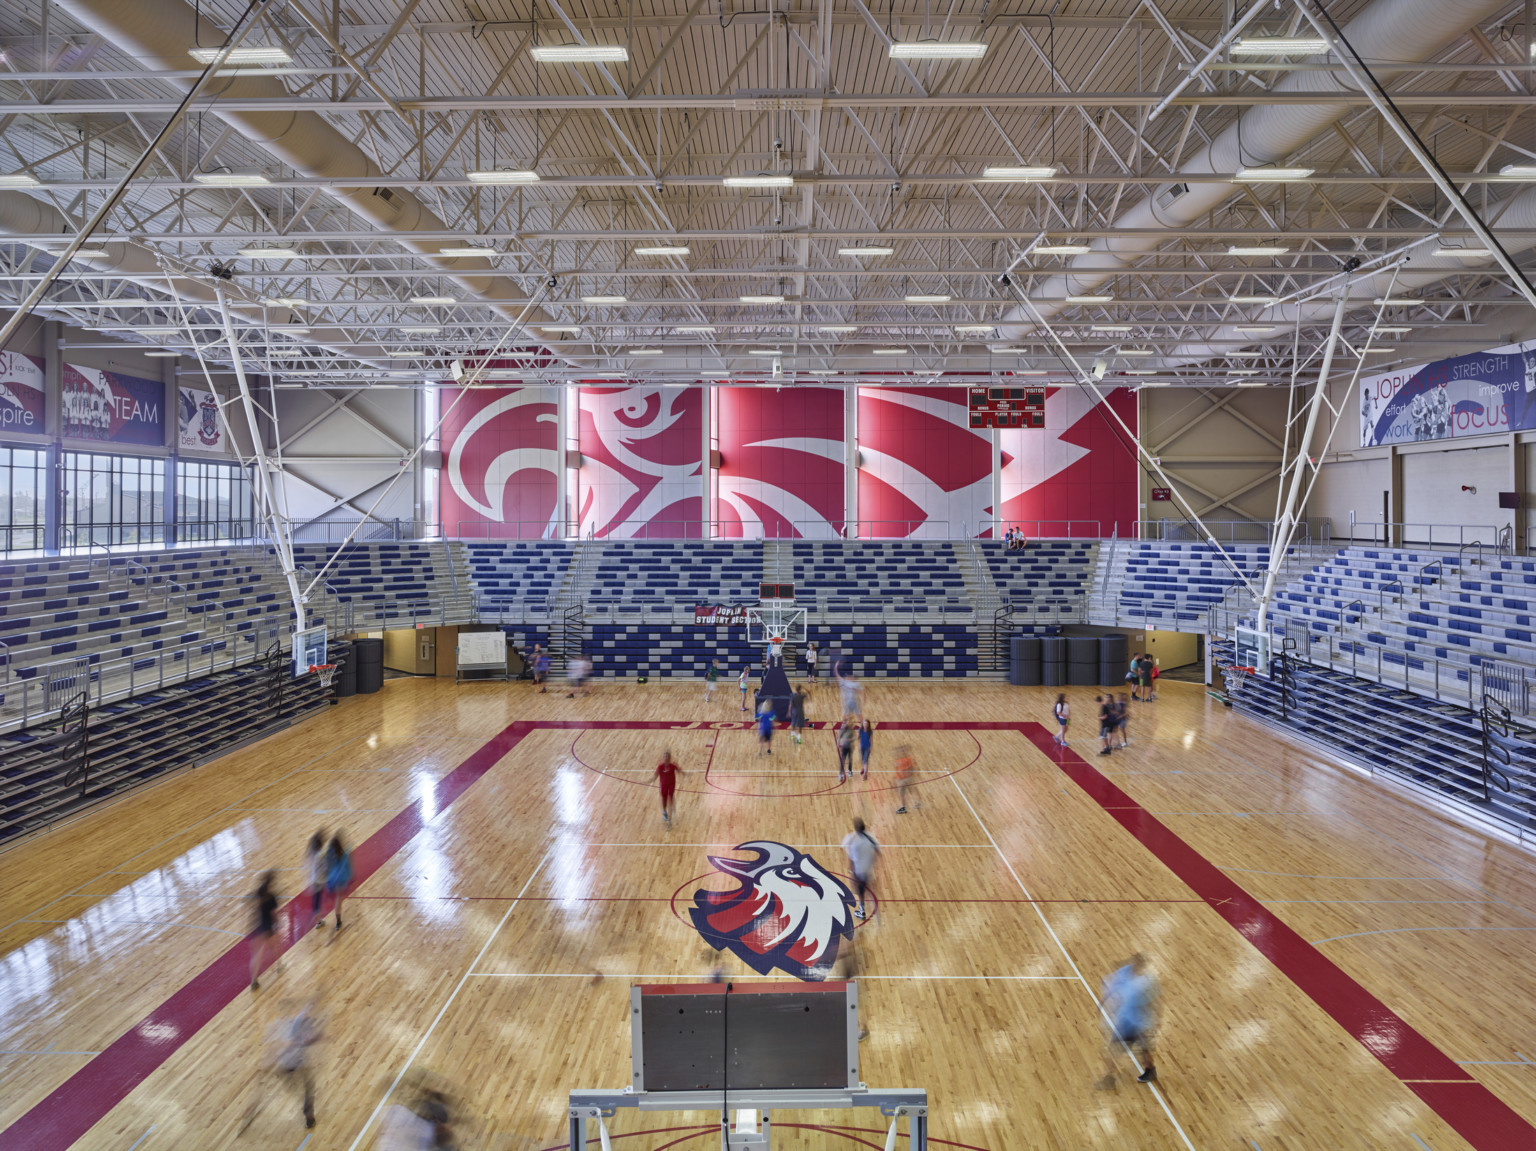 Double height wood floor gymnasium. Blue and white bleachers at sides with retracted lower deck. Eagle mural on back wall